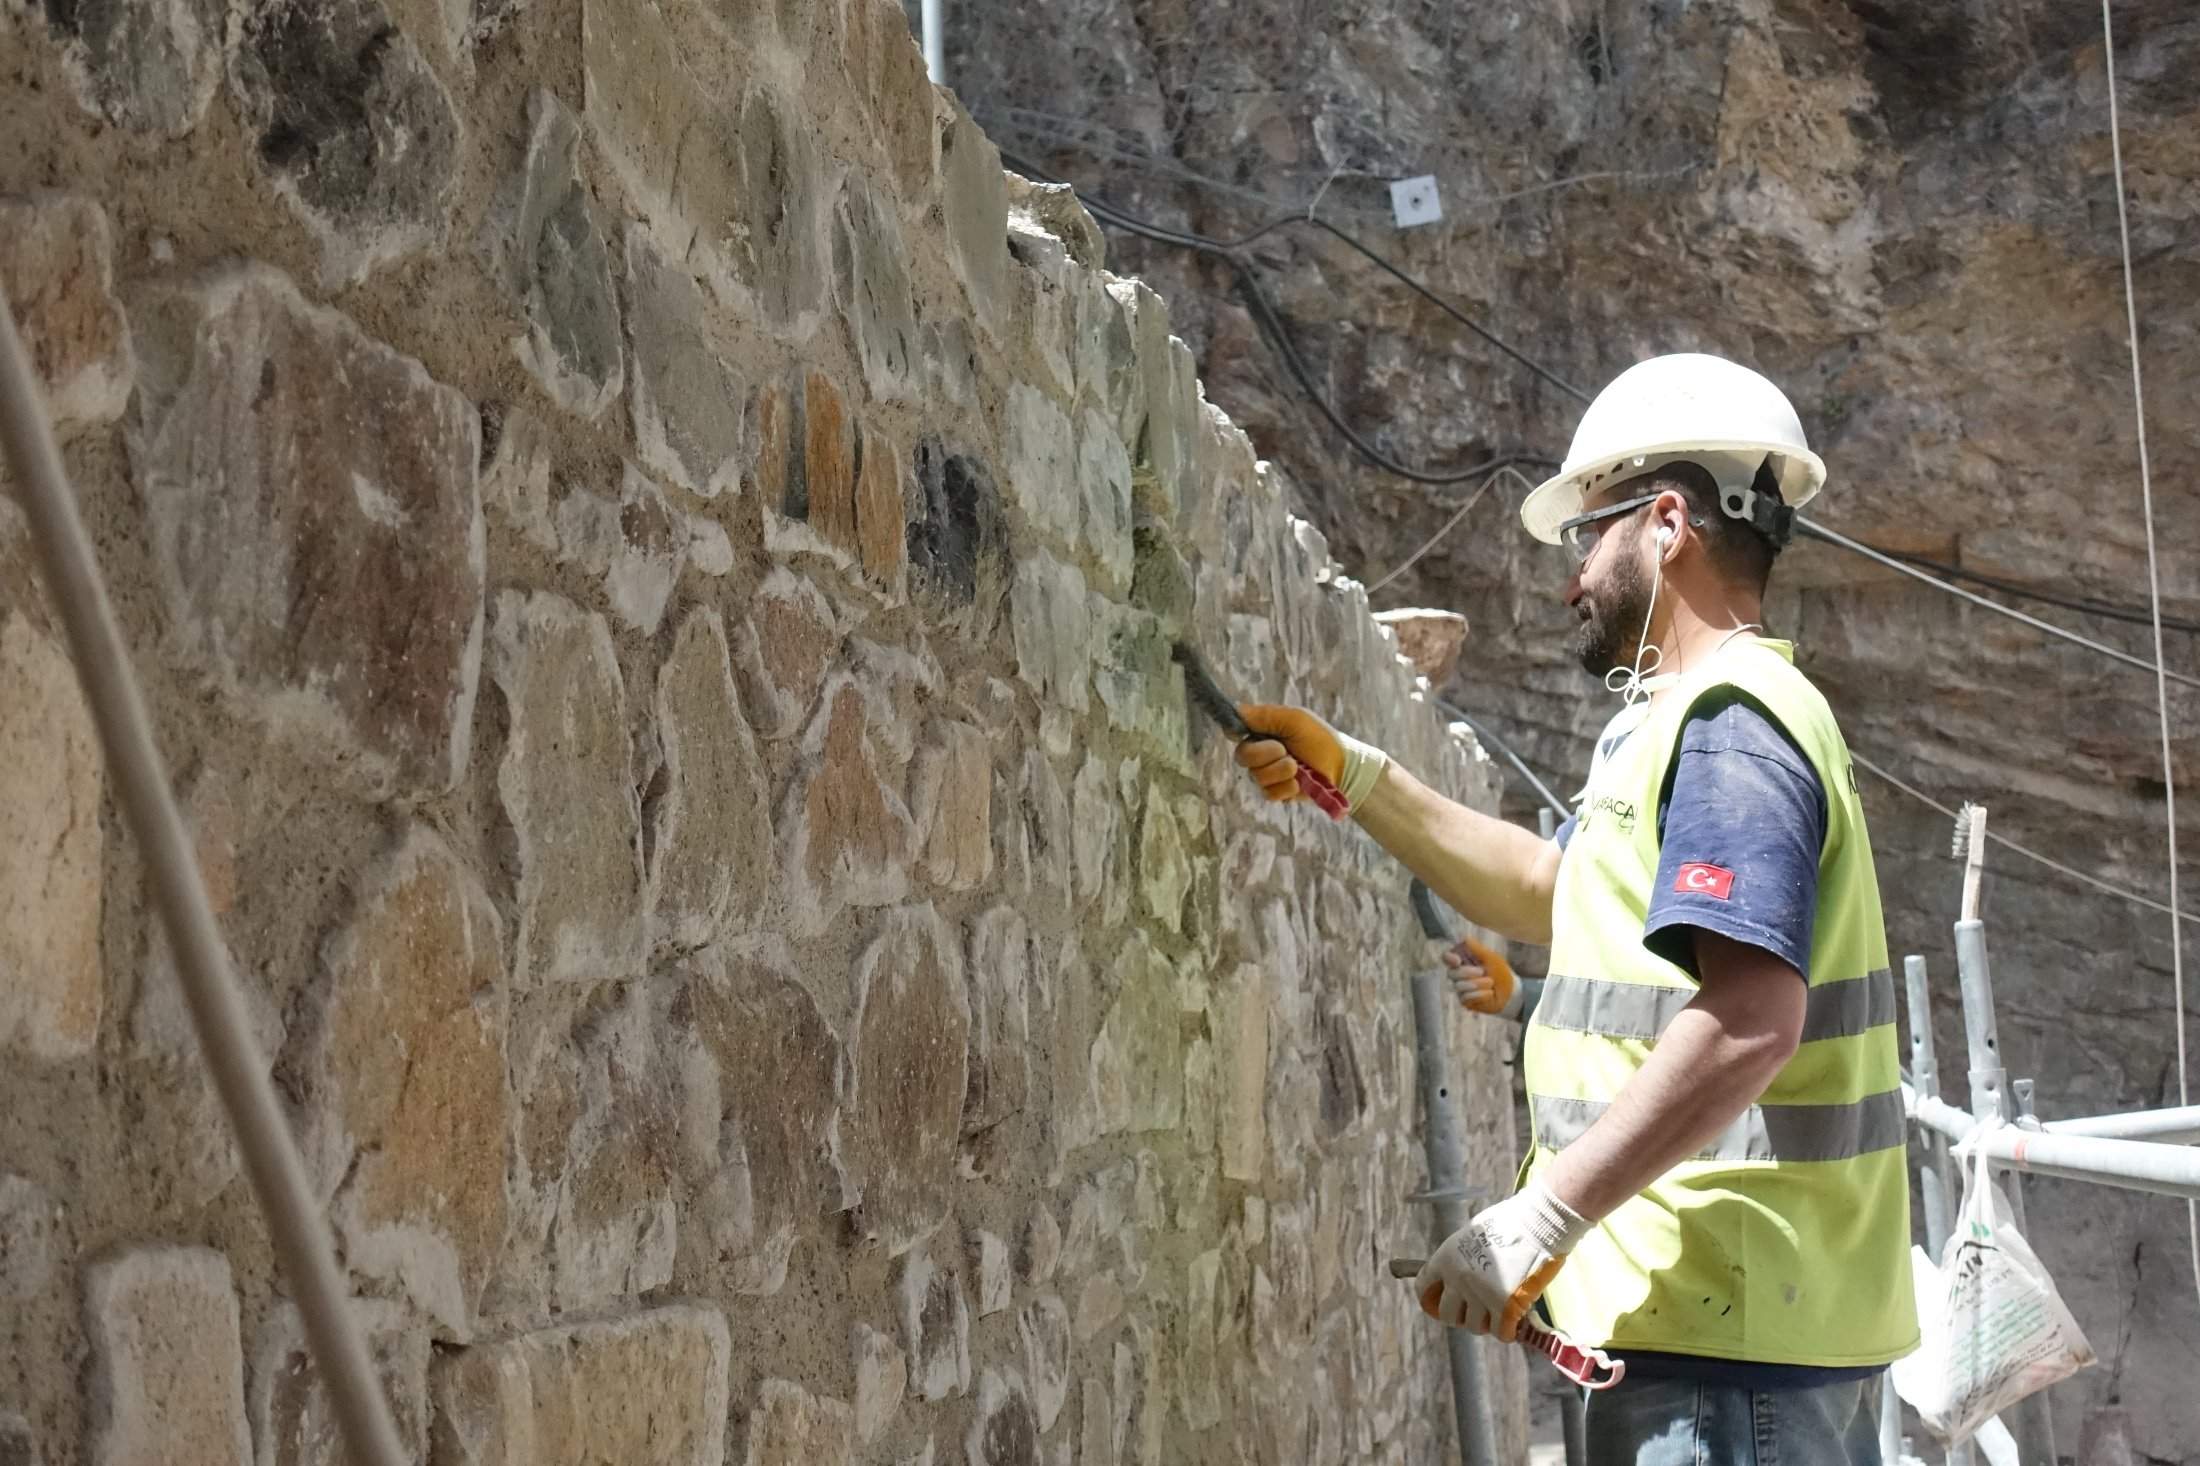 A specialist brushes the side of a historical wall at the Sümela Monastery as part of the restoration efforts, in Trabzon, Turkey, May 30, 2021. (AA Photo)